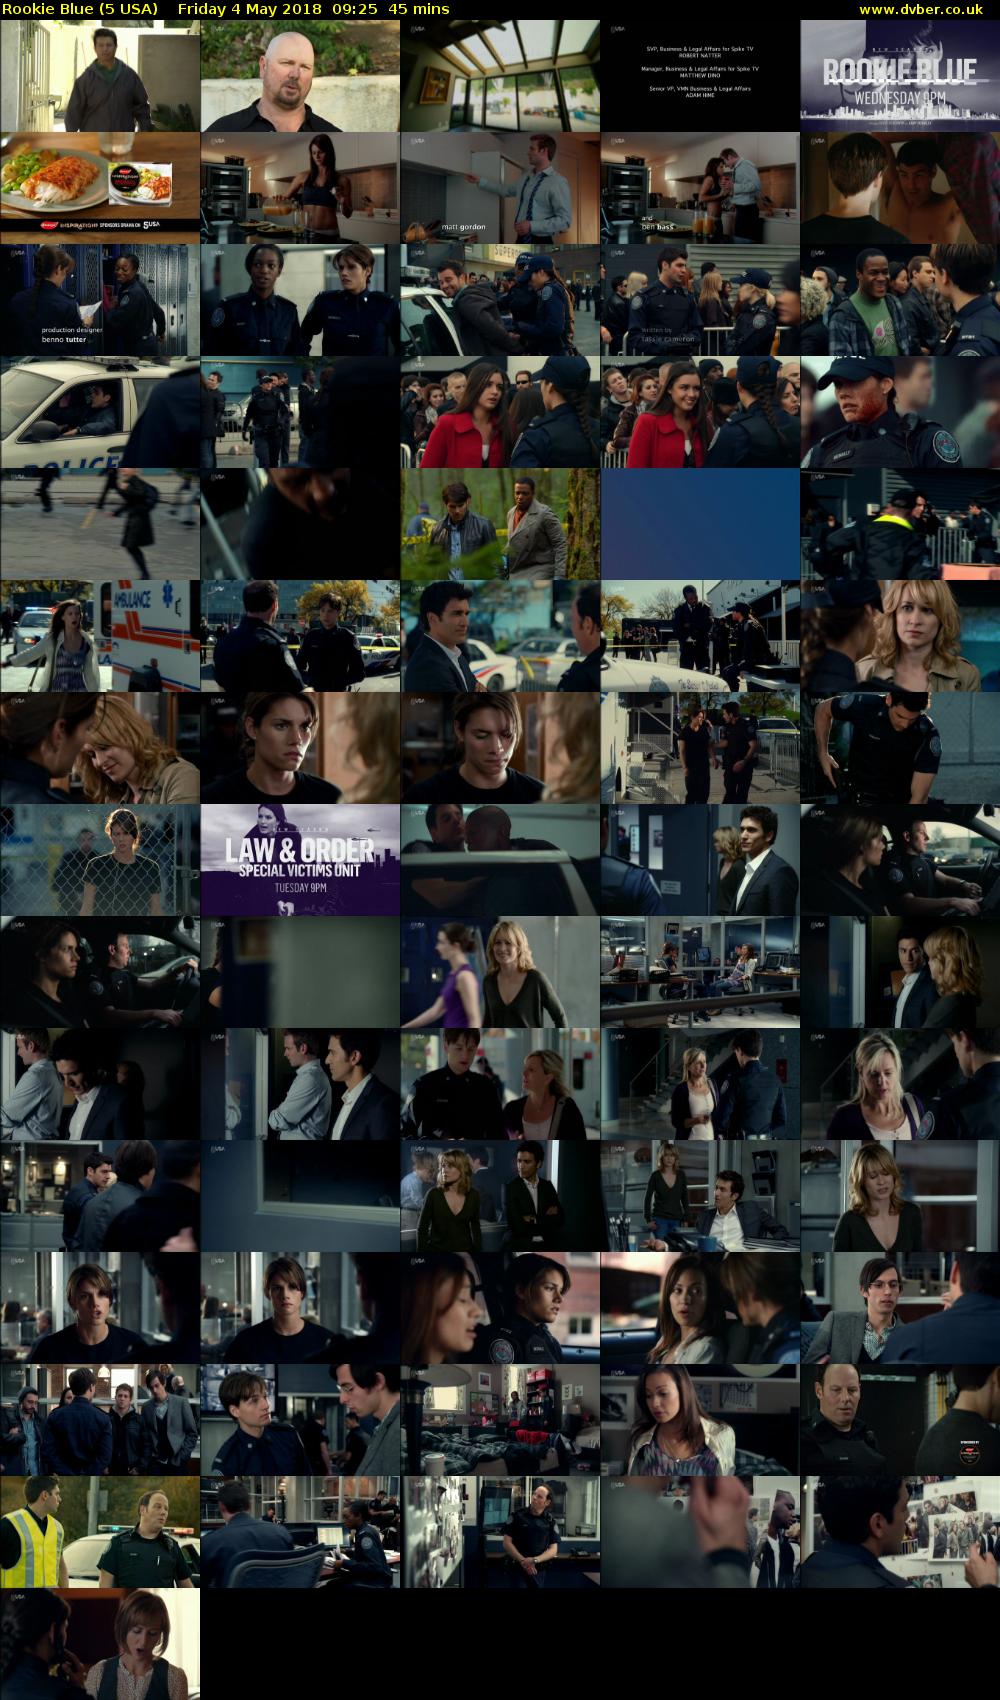 Rookie Blue (5 USA) Friday 4 May 2018 09:25 - 10:10